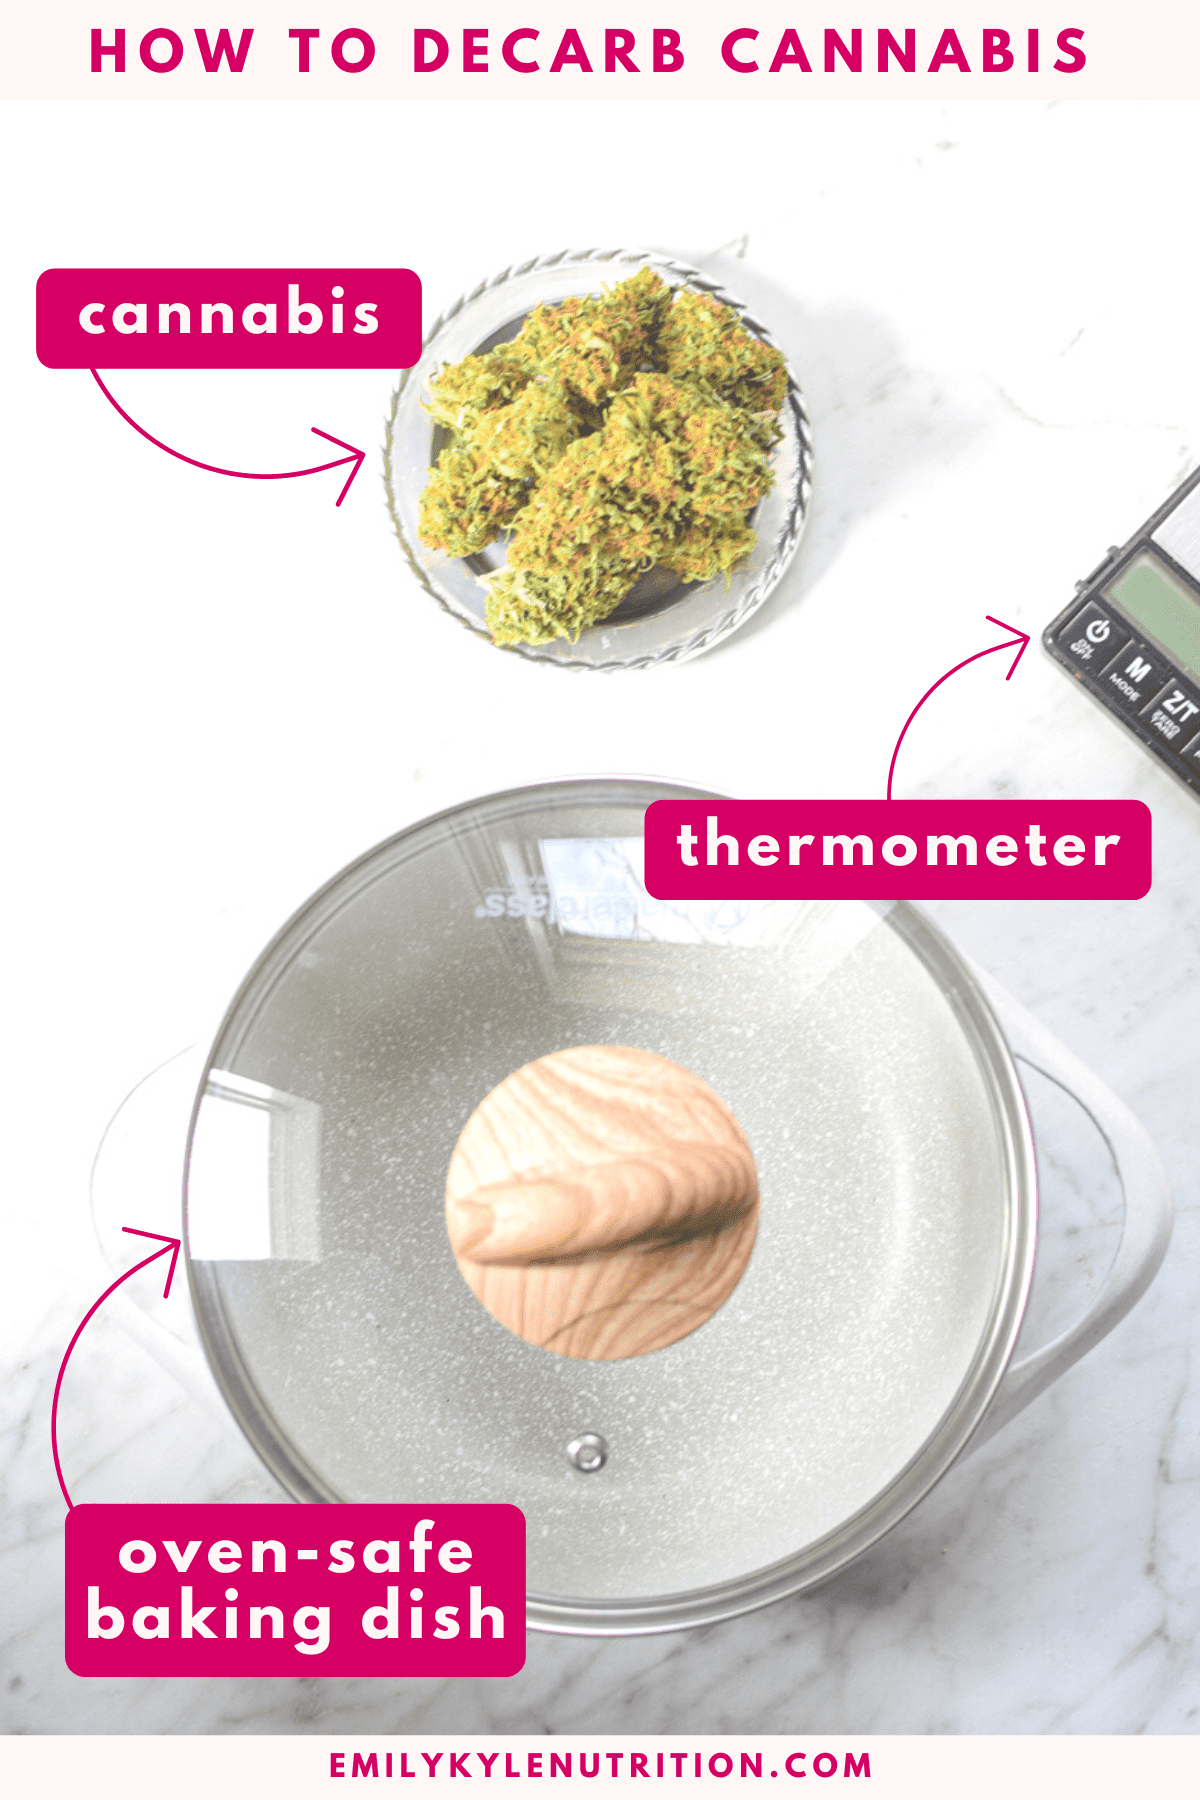 A picture of the ingredients and equipment needed to decarb cannabis at home including cannabis flower, a scale, and an oven-safe baking dish.